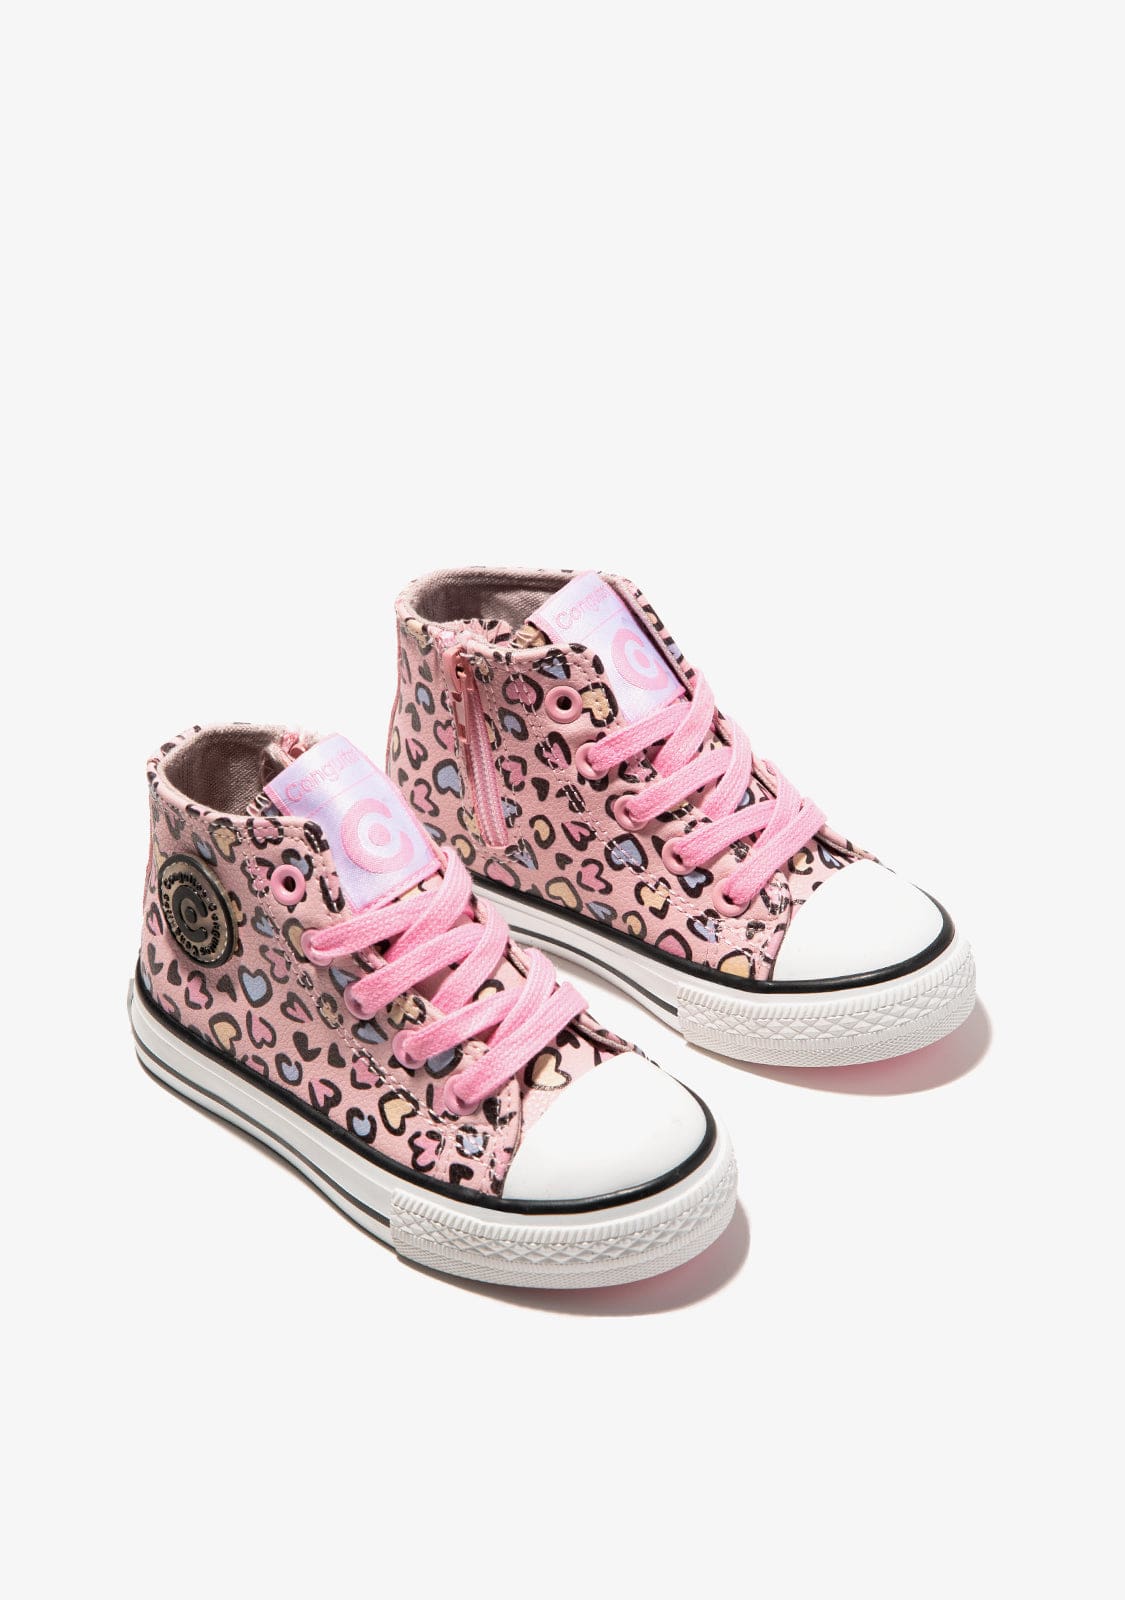 CONGUITOS Shoes Girl's Pink Print Hearts Hi-Top Sneakers